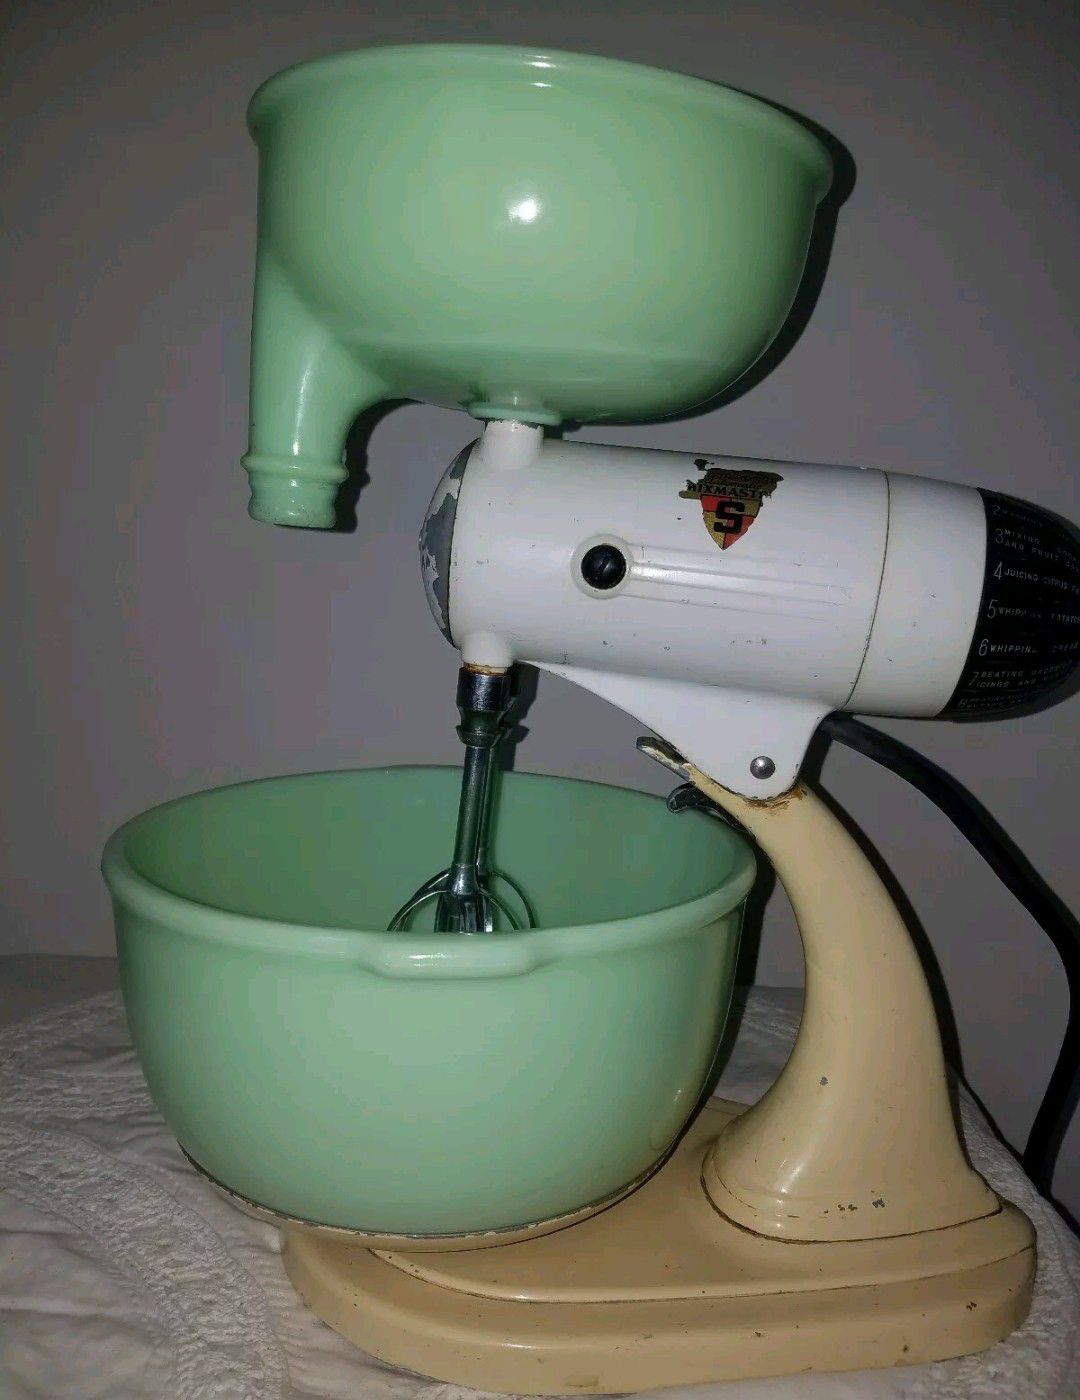 Best Antique Sunbeam Mixmaster Electric Mixer With Jadeite Bowl And Jadeite  Juicer Attachment for sale in Toms River, New Jersey for 2024